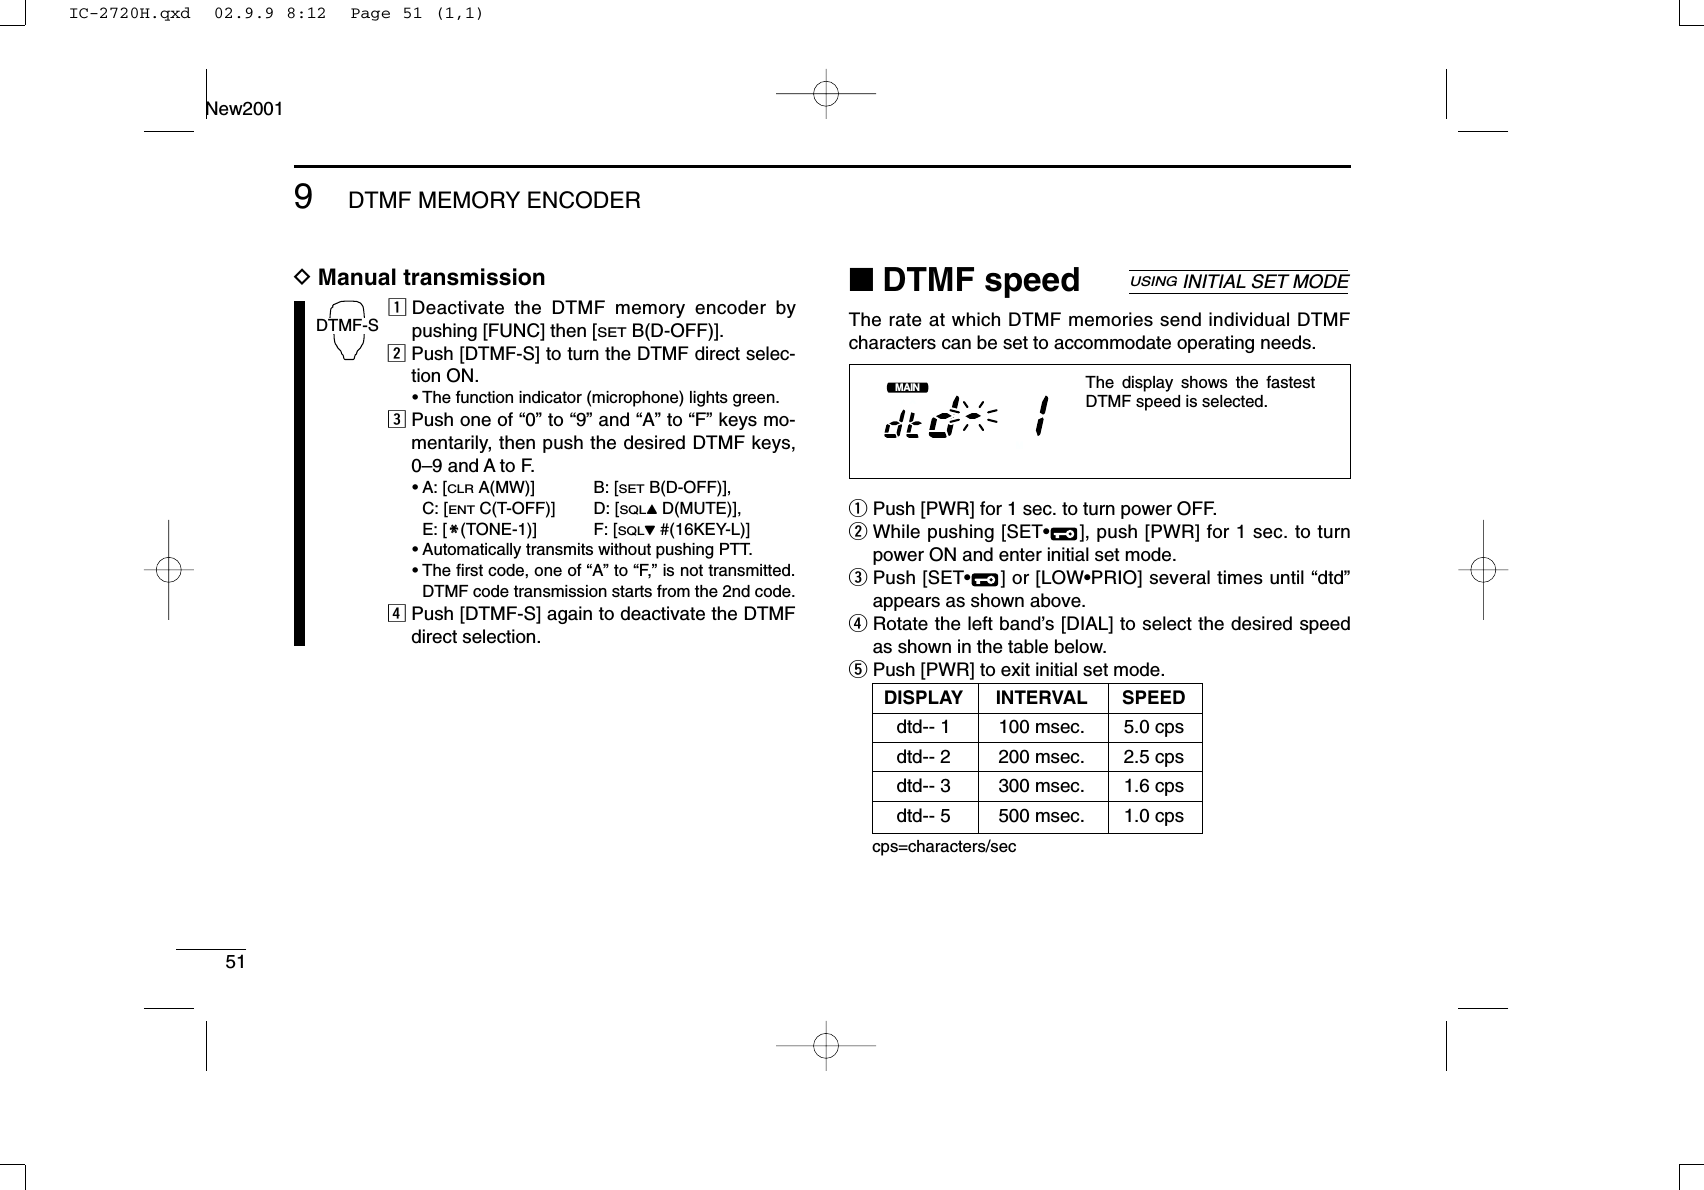 519DTMF MEMORY ENCODERNew2001DManual transmissionzDeactivate the DTMF memory encoder bypushing [FUNC] then [SETB(D-OFF)].xPush [DTMF-S] to turn the DTMF direct selec-tion ON.•The function indicator (microphone) lights green.cPush one of “0” to “9” and “A” to “F” keys mo-mentarily, then push the desired DTMF keys,0–9 and A to F.•A: [CLRA(MW)] B: [SETB(D-OFF)], C: [ENTC(T-OFF)] D: [SQLYD(MUTE)], E: [MM(TONE-1)] F: [SQLZ#(16KEY-L)]•Automatically transmits without pushing PTT.•The ﬁrst code, one of “A” to “F,” is not transmitted.DTMF code transmission starts from the 2nd code.vPush [DTMF-S] again to deactivate the DTMFdirect selection.■DTMF speedThe rate at which DTMF memories send individual DTMFcharacters can be set to accommodate operating needs.qPush [PWR] for 1 sec. to turn power OFF.wWhile pushing [SET•], push [PWR] for 1 sec. to turnpower ON and enter initial set mode.ePush [SET•] or [LOW•PRIO] several times until “dtd”appears as shown above.rRotate the left band’s [DIAL] to select the desired speedas shown in the table below.tPush [PWR] to exit initial set mode.cps=characters/secMAINT  XMThe display shows the fastest DTMF speed is selected.USINGINITIAL SET MODEDTMF-SDISPLAY INTERVAL SPEEDdtd-- 1 100 msec. 5.0 cpsdtd-- 2 200 msec. 2.5 cpsdtd-- 3 300 msec. 1.6 cpsdtd-- 5 500 msec. 1.0 cpsIC-2720H.qxd  02.9.9 8:12  Page 51 (1,1)